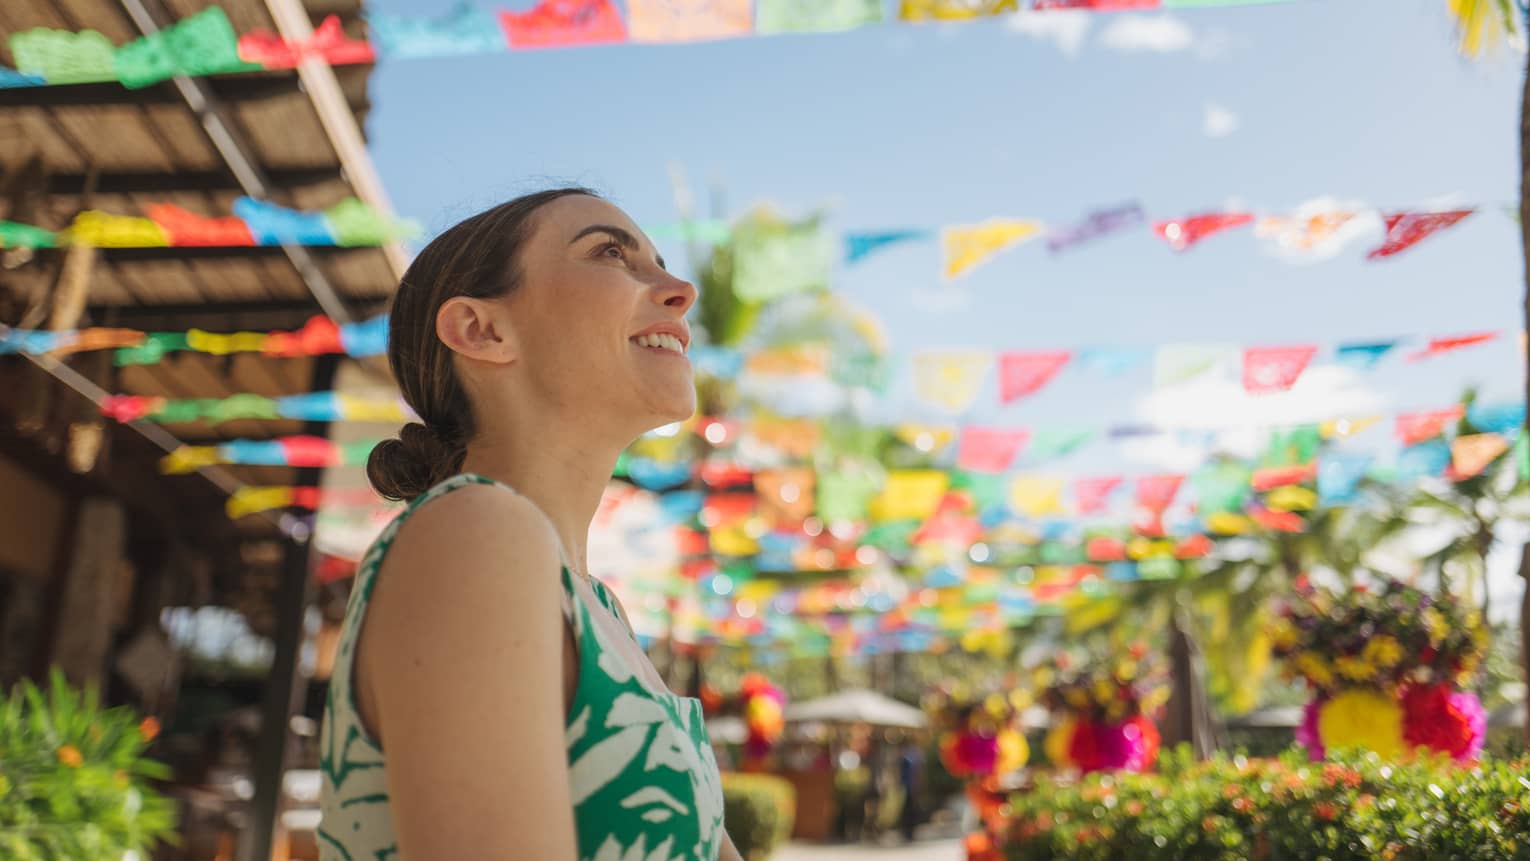 Woman with her hair pulled back in a low bun and wearing a green-and-white patterned dress stands beneath rows of colored squares hanging in an outdoor market